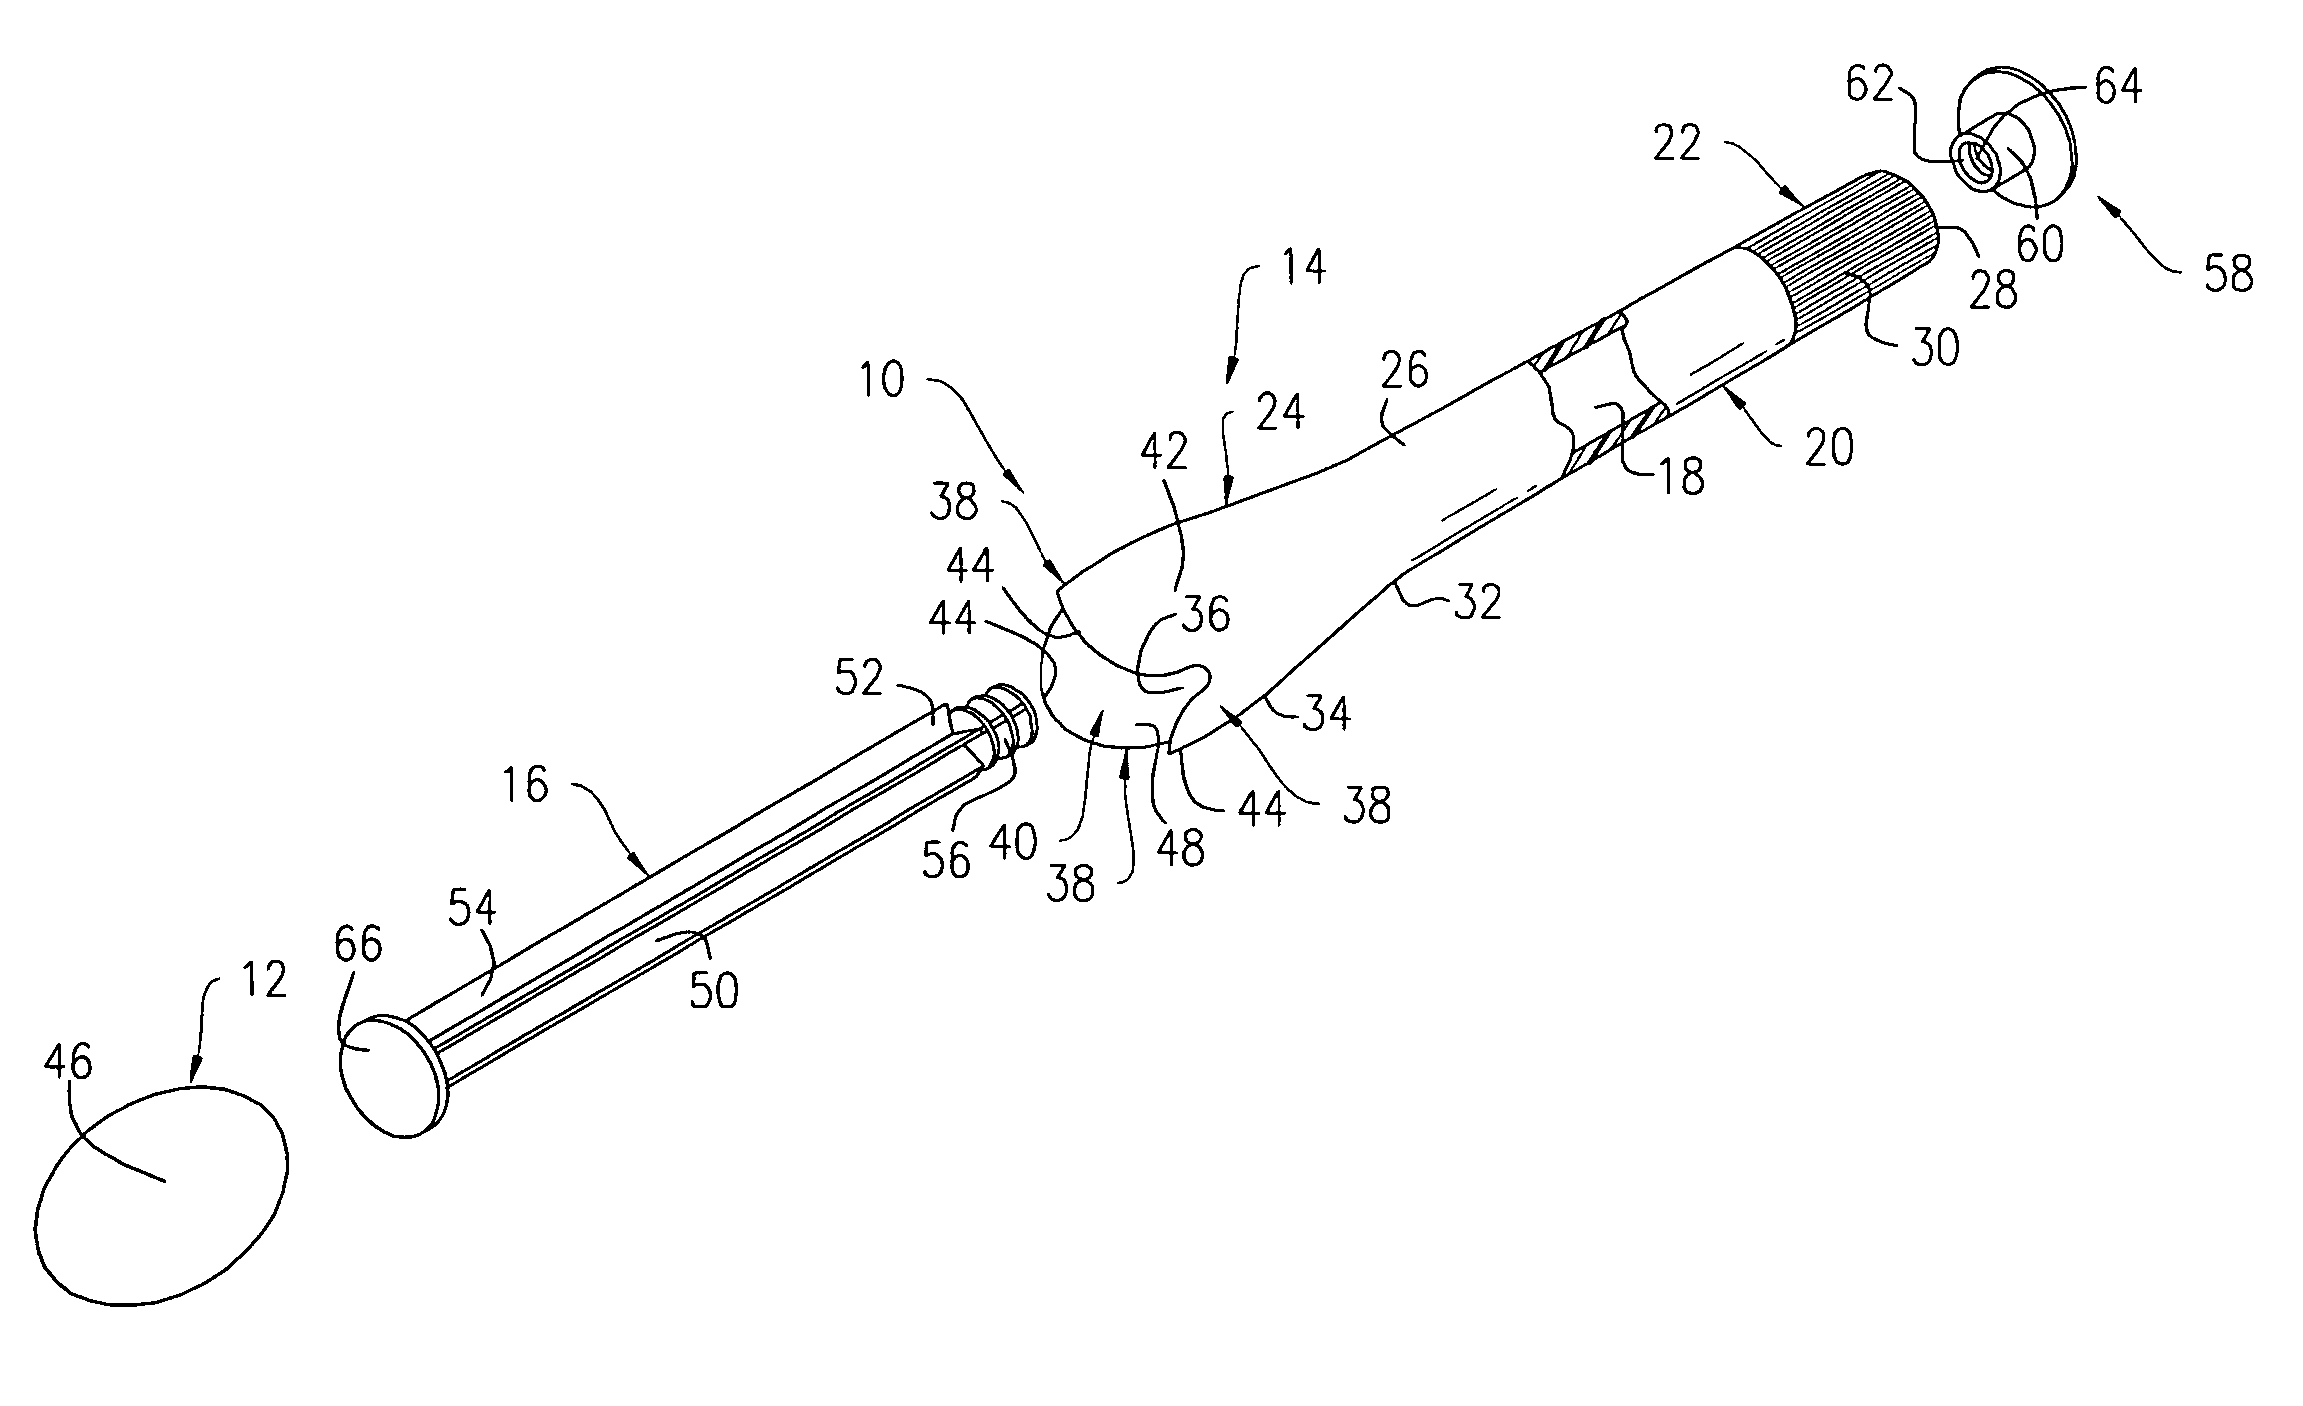 Applicator device for suppositories and the like